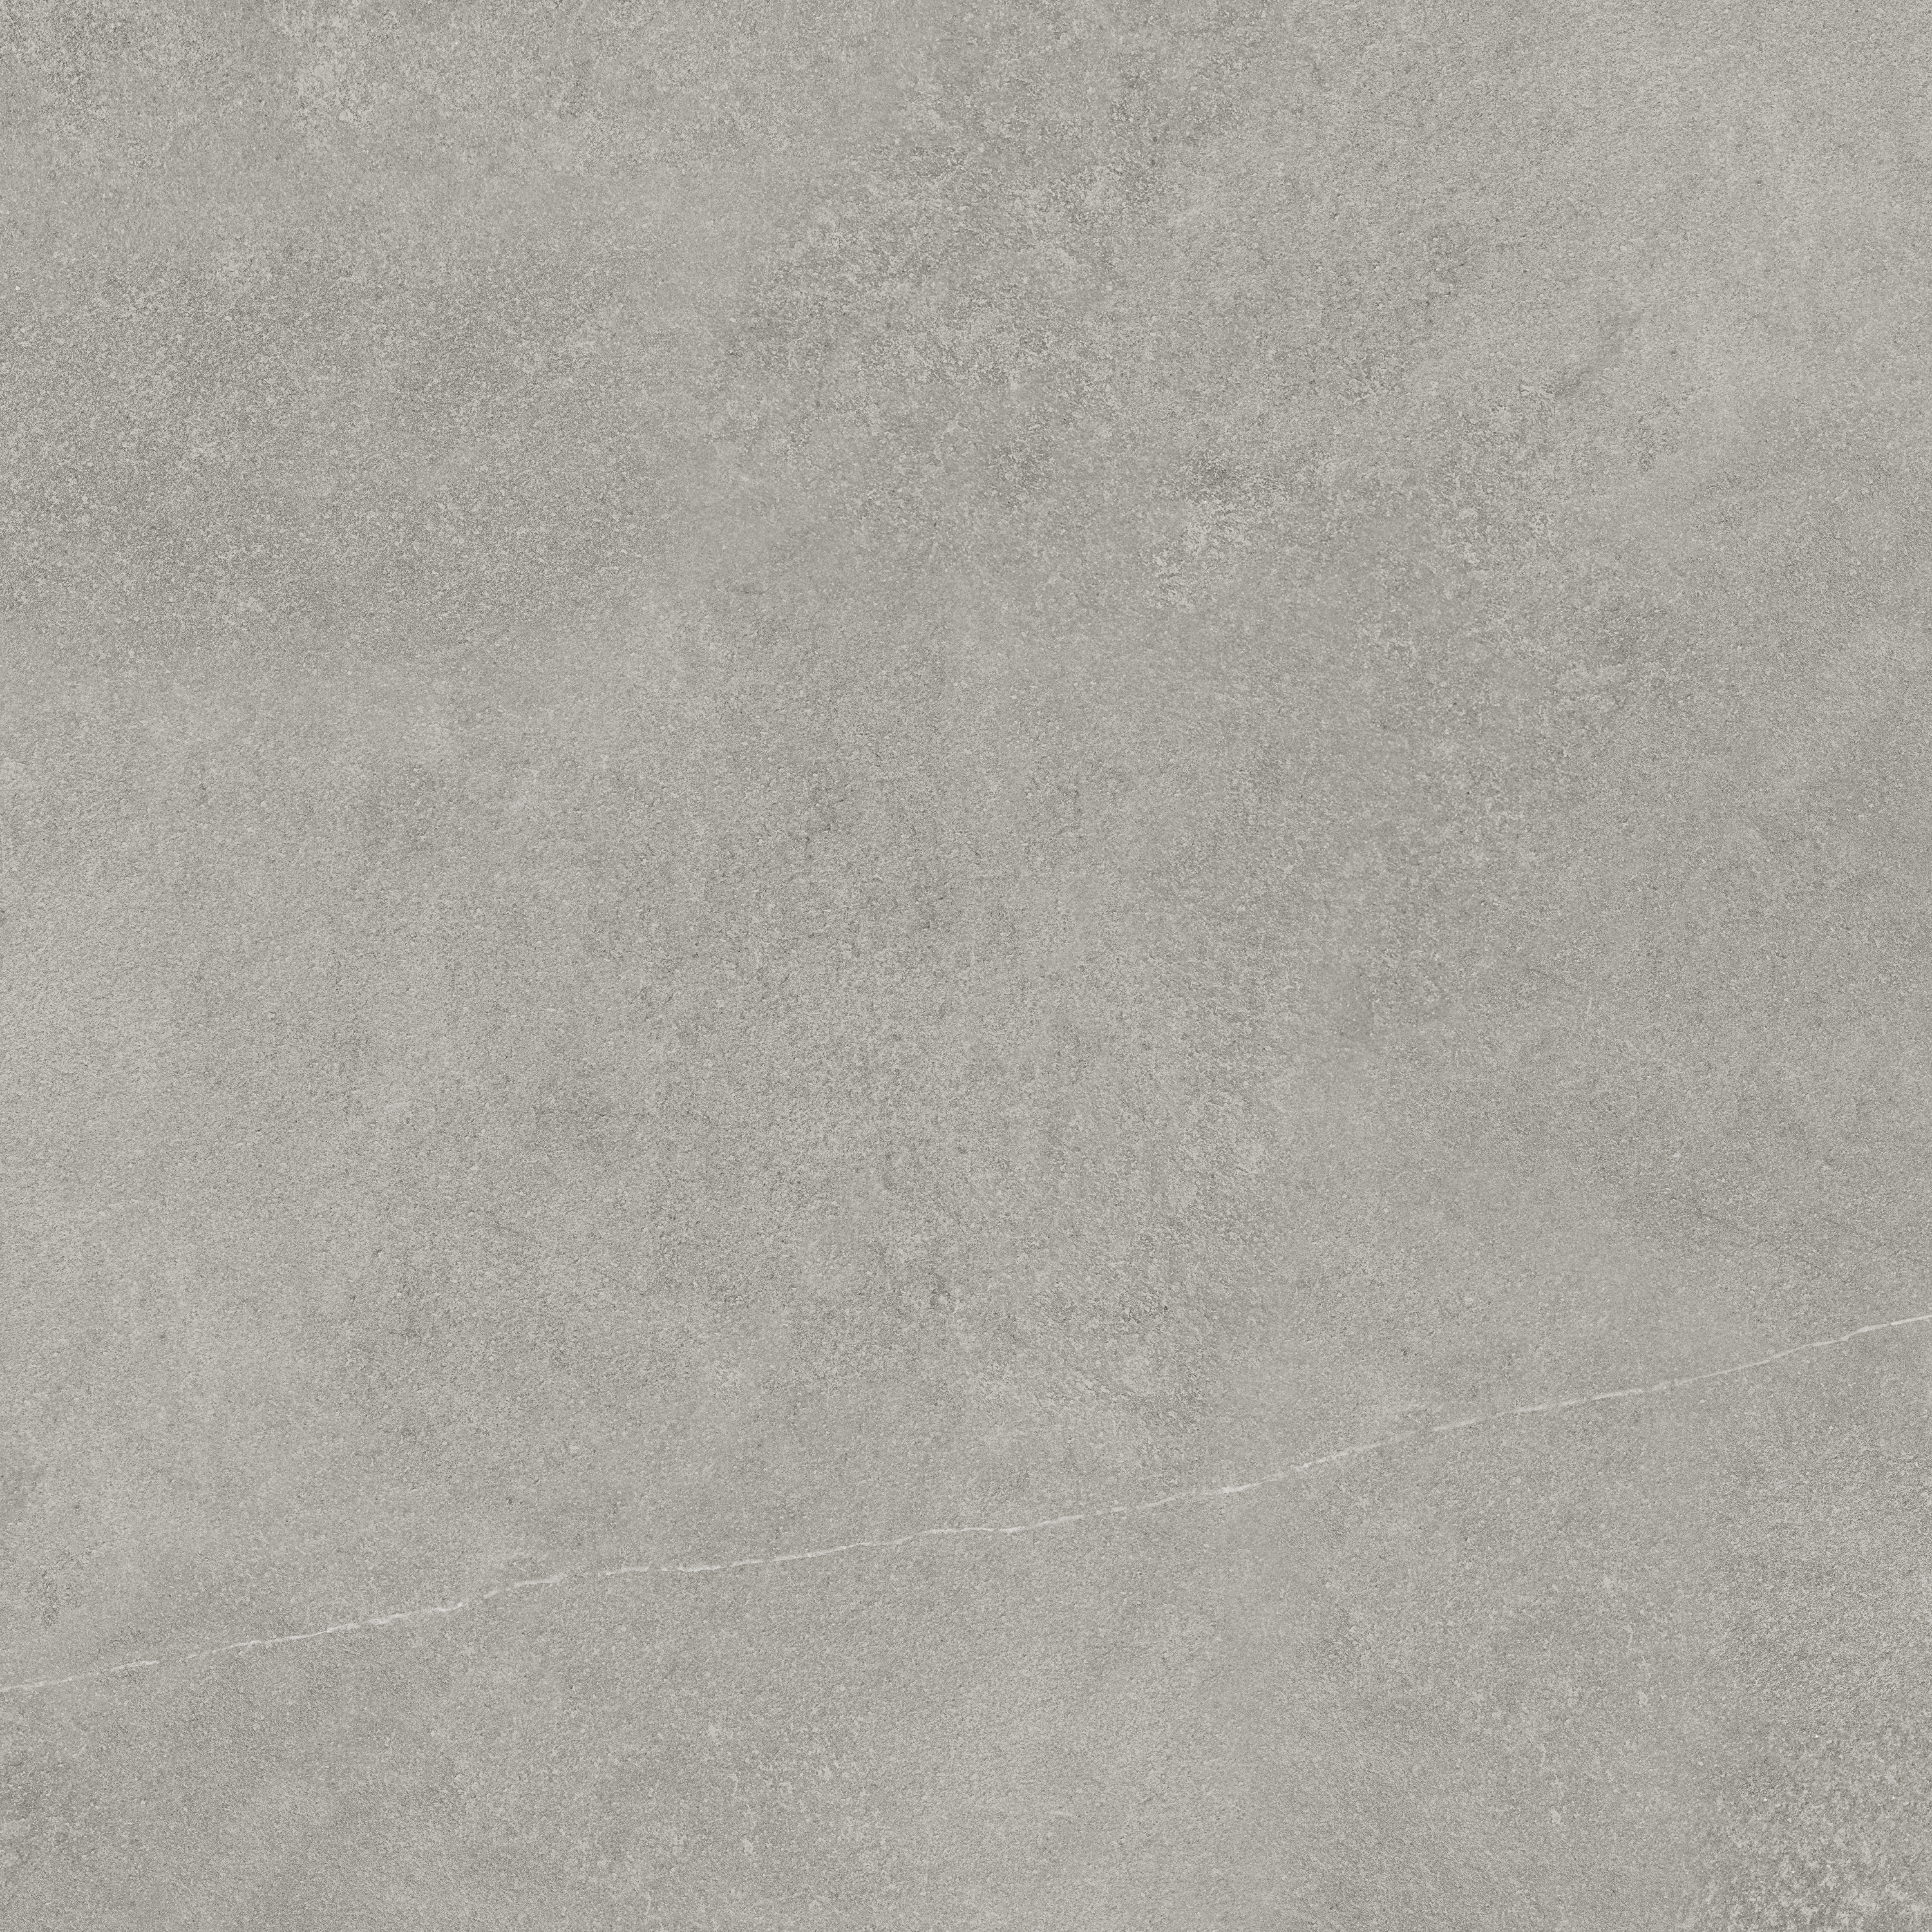 clay pattern color body porcelain field tile from mjork anatolia collection distributed by surface group international matte finish rectified edge 32x32 square shape